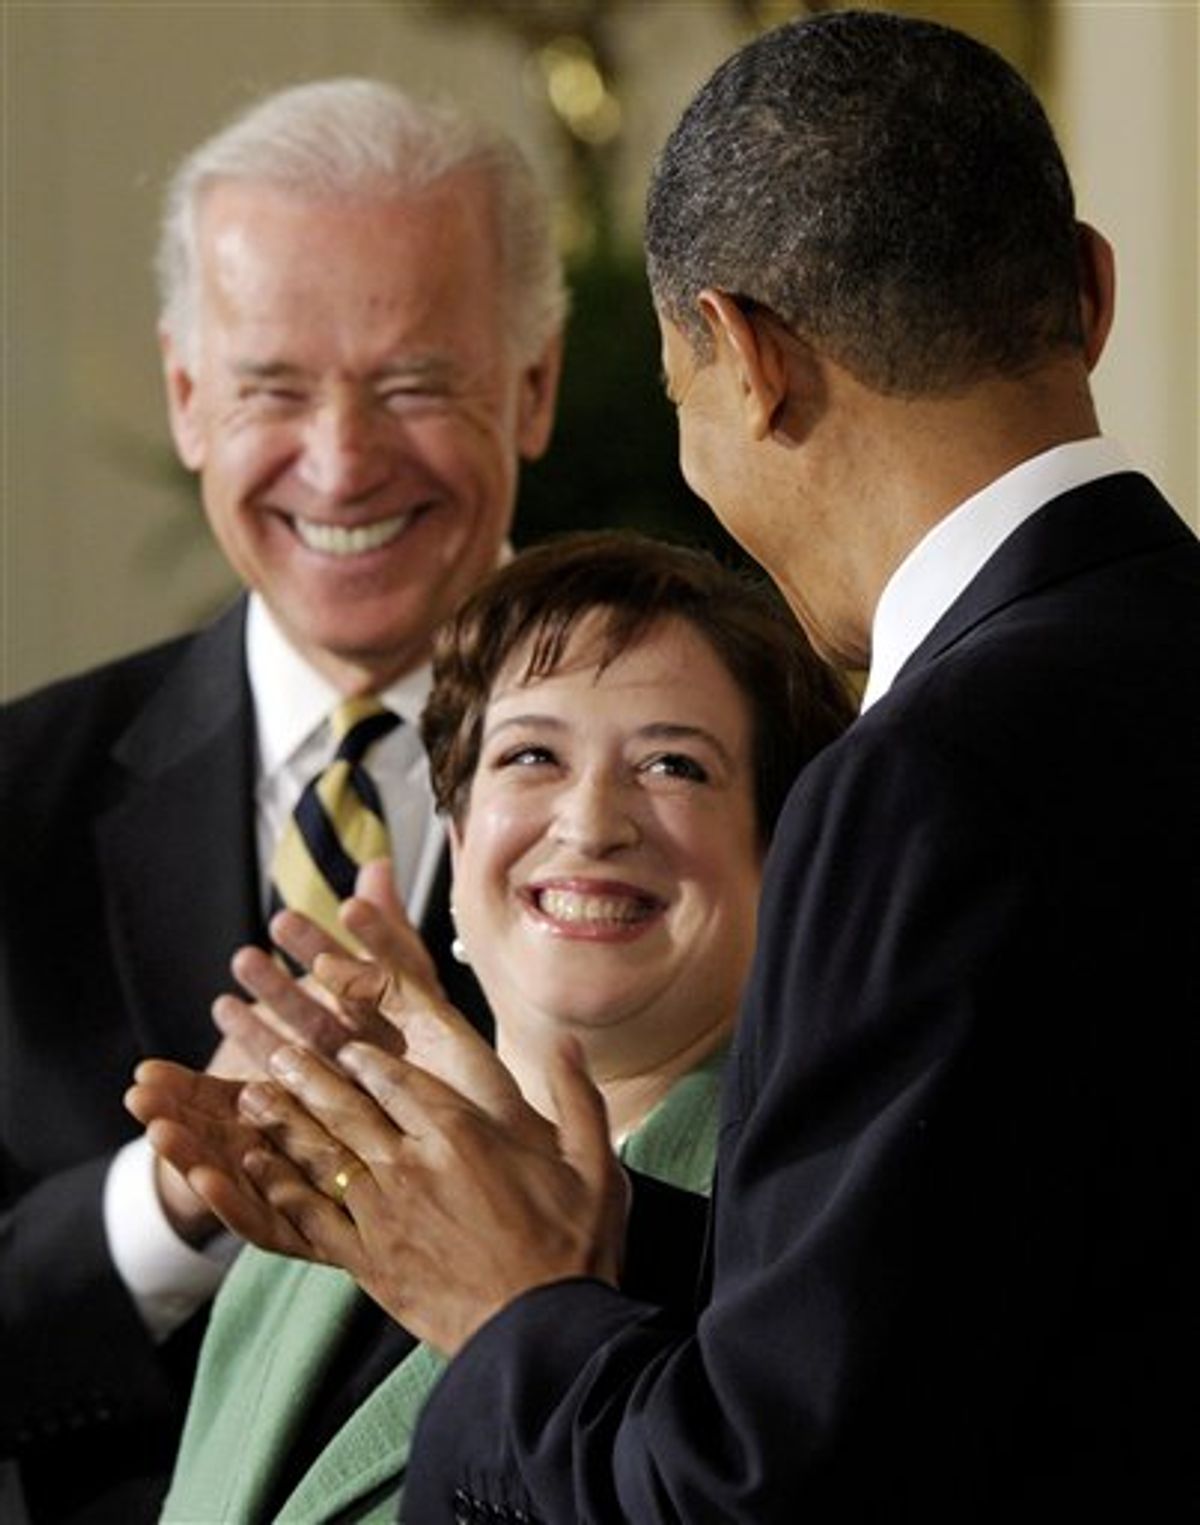 Solicitor General Elena Kagan is applauded by President Barack Obama and Vice President Joe Biden as she is introduced as Obama's nominee for the Supreme Court during an announcement in the East Room of the White House in Washington, Monday, May 10, 2010. (AP Photo/Susan Walsh)        (AP)